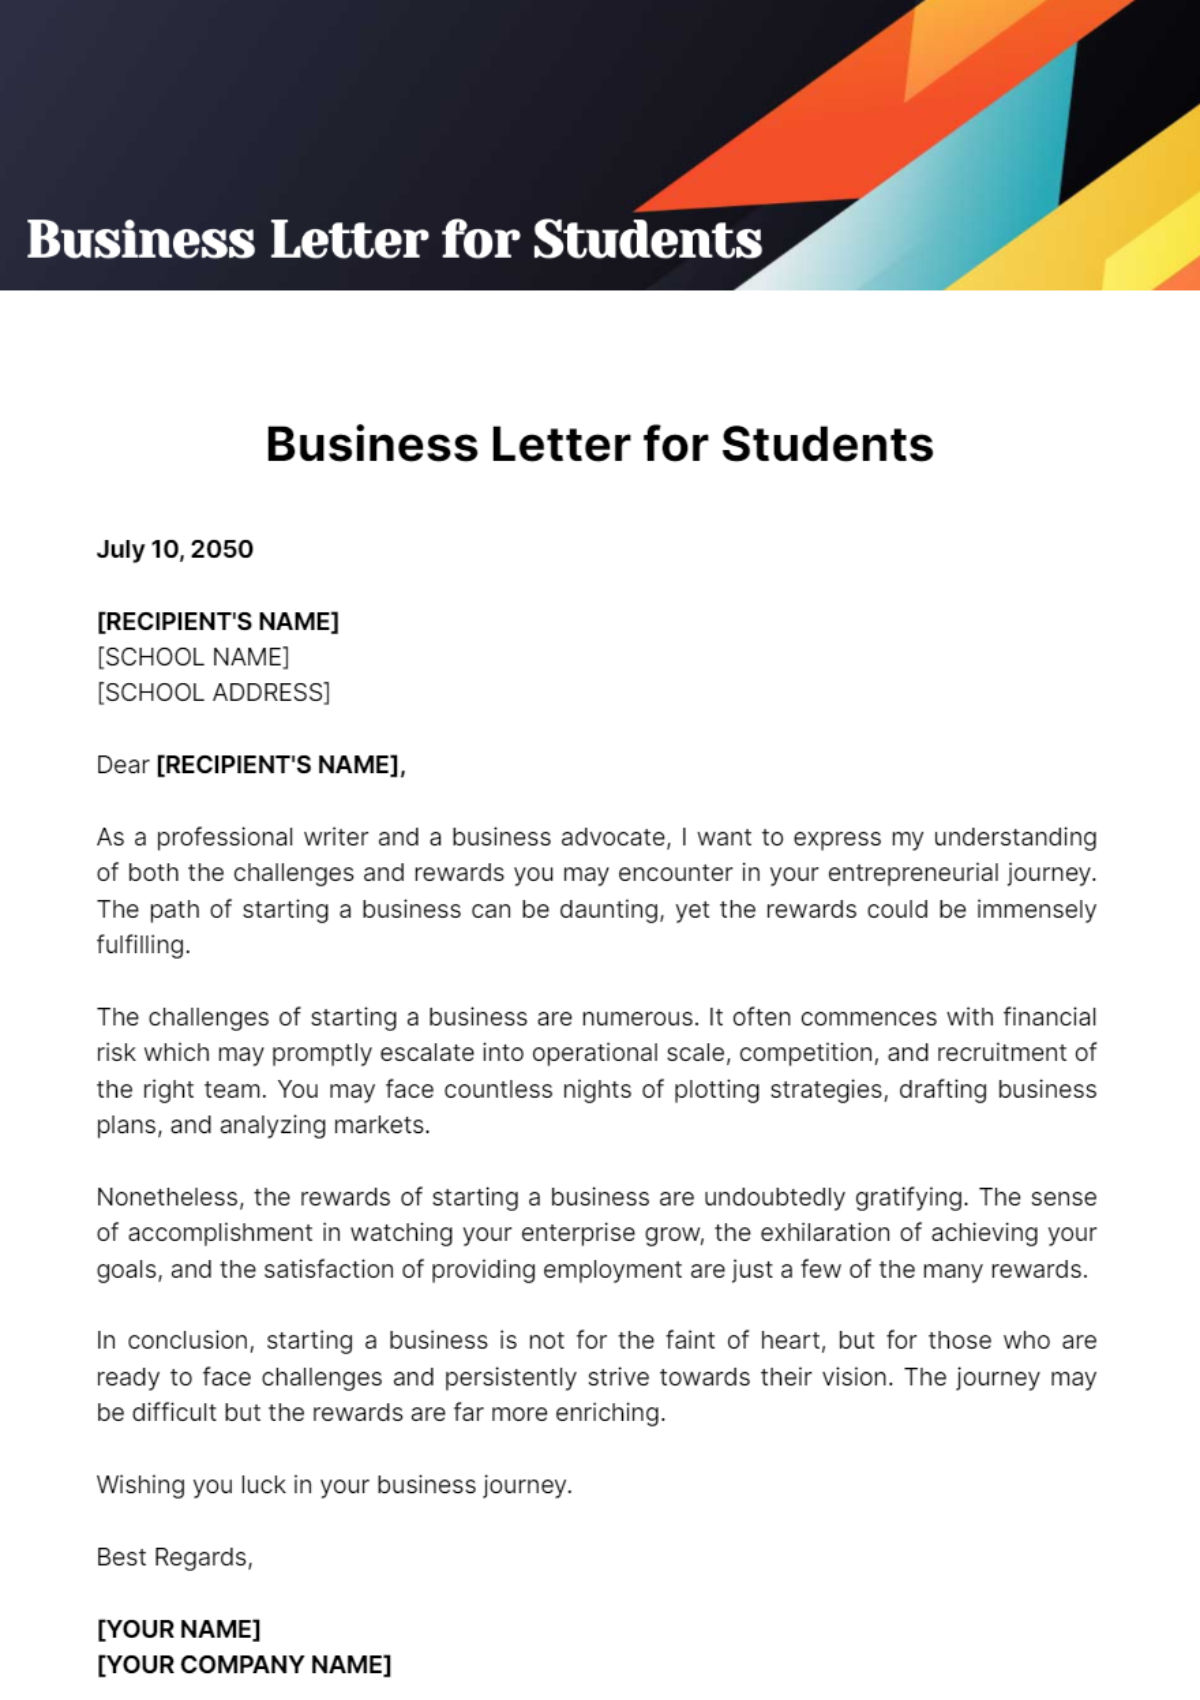 Free Business Letter for Students Template